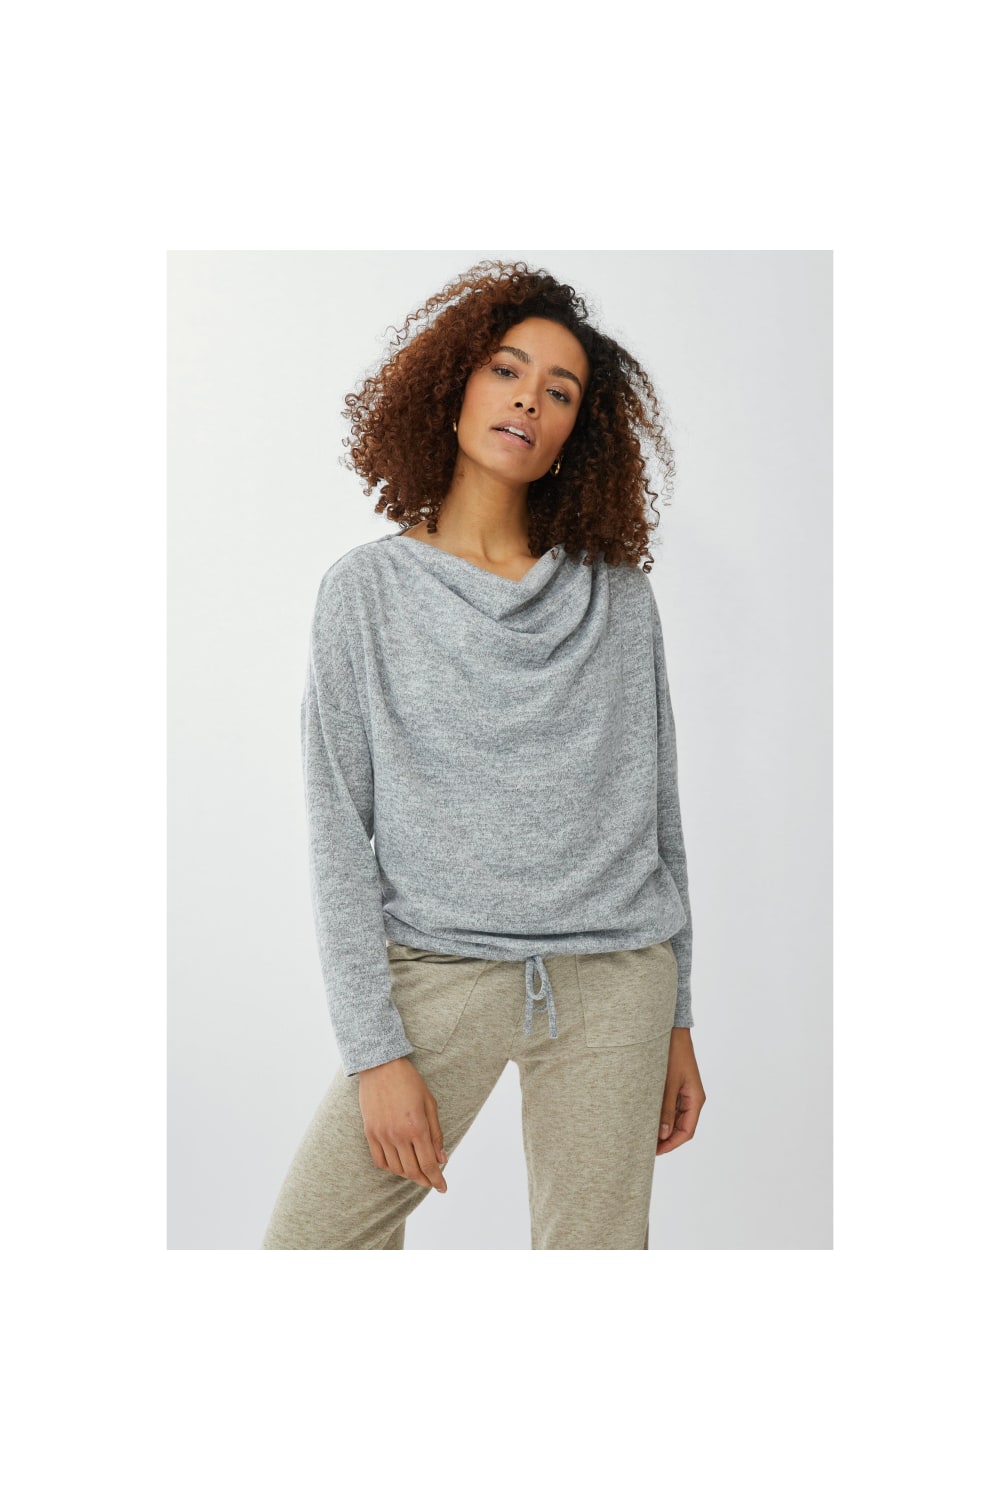 Womens/Ladies Jersey Knit Cowl Neck Long-Sleeved Top - Grey Marl